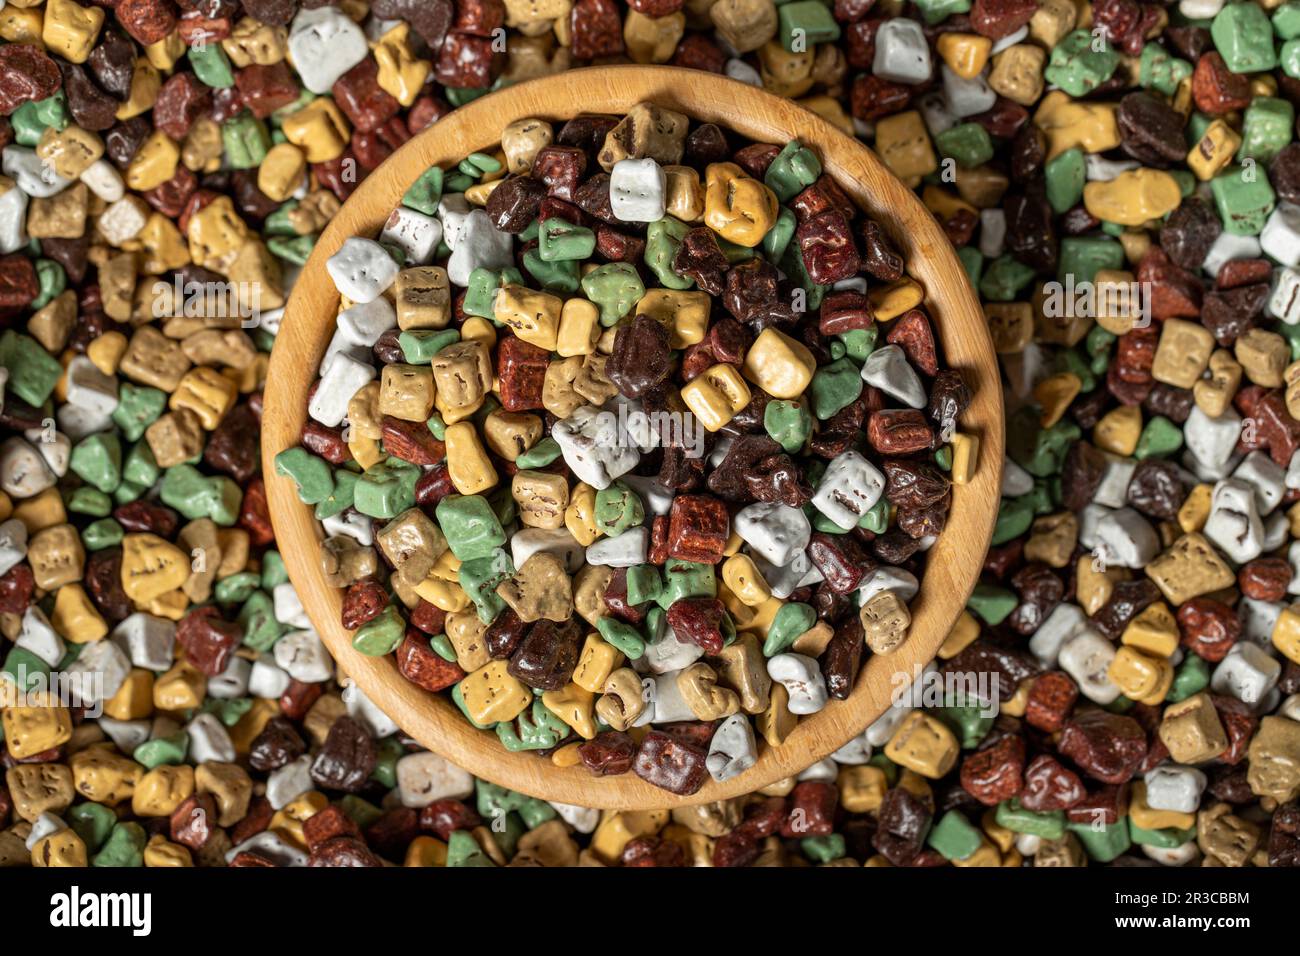 Colorful chocolate candy stones. Stone chocolate dragee in wooden bowl. Small multi-colored candies. Top view Stock Photo